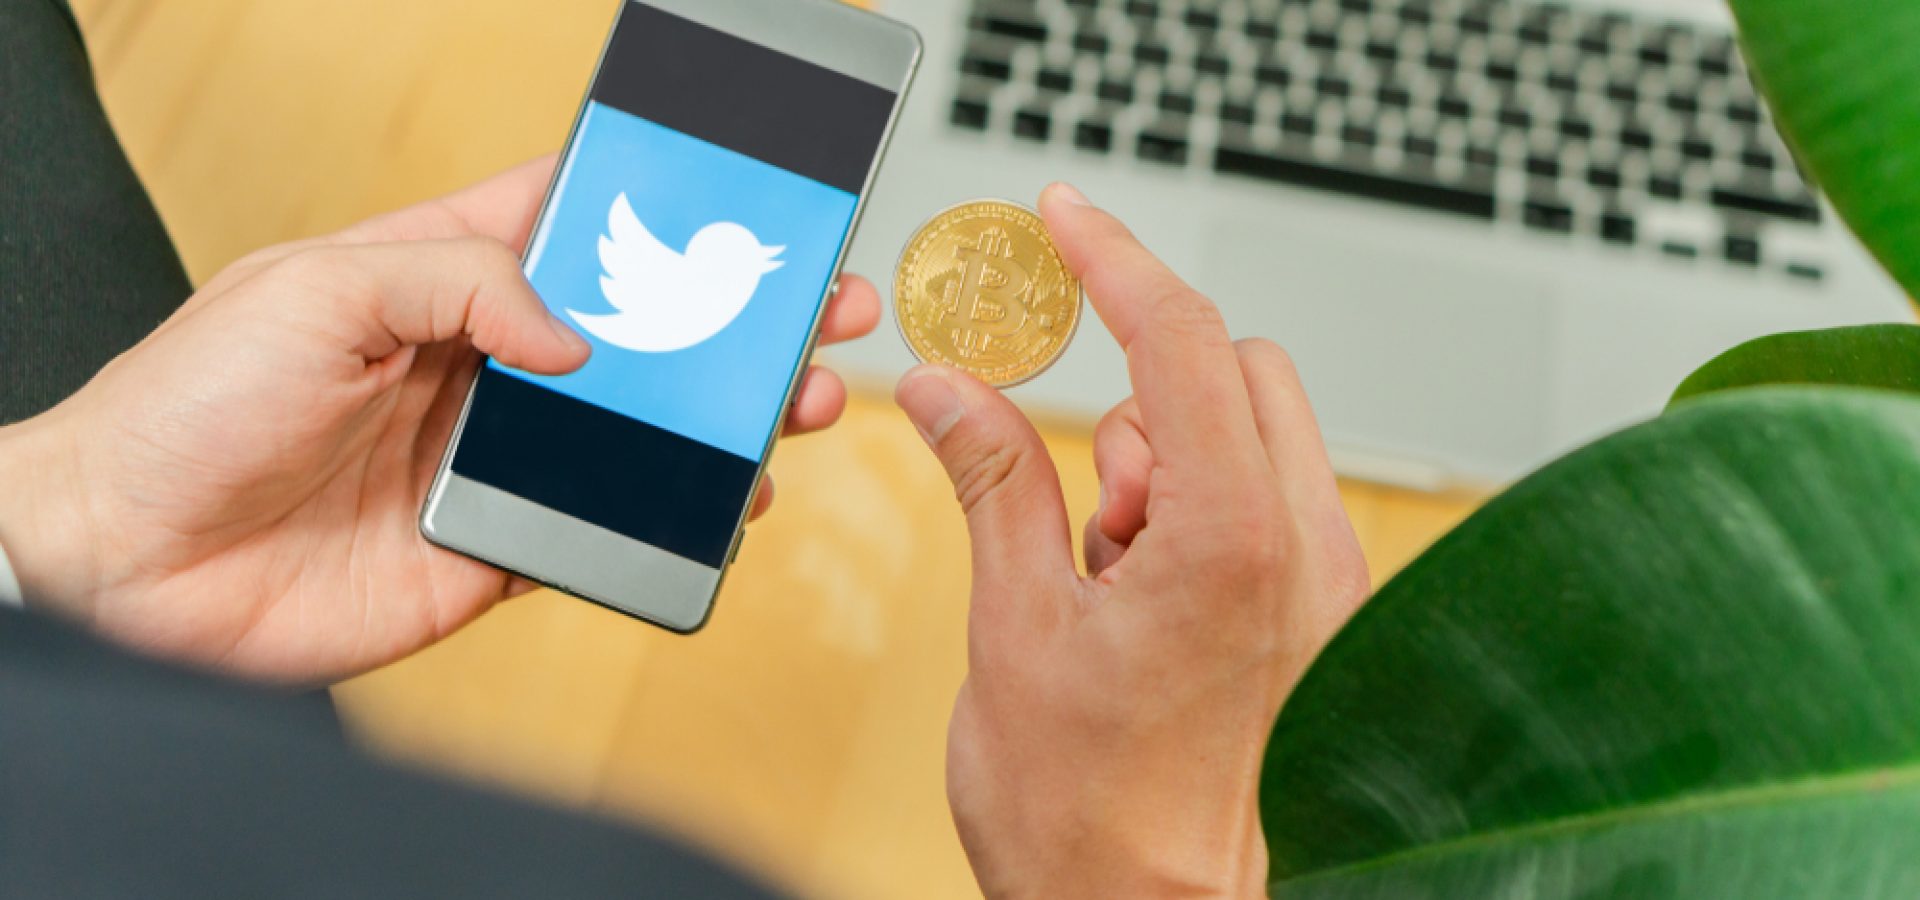 Twitter & Crypto – What Does the Future Hold?